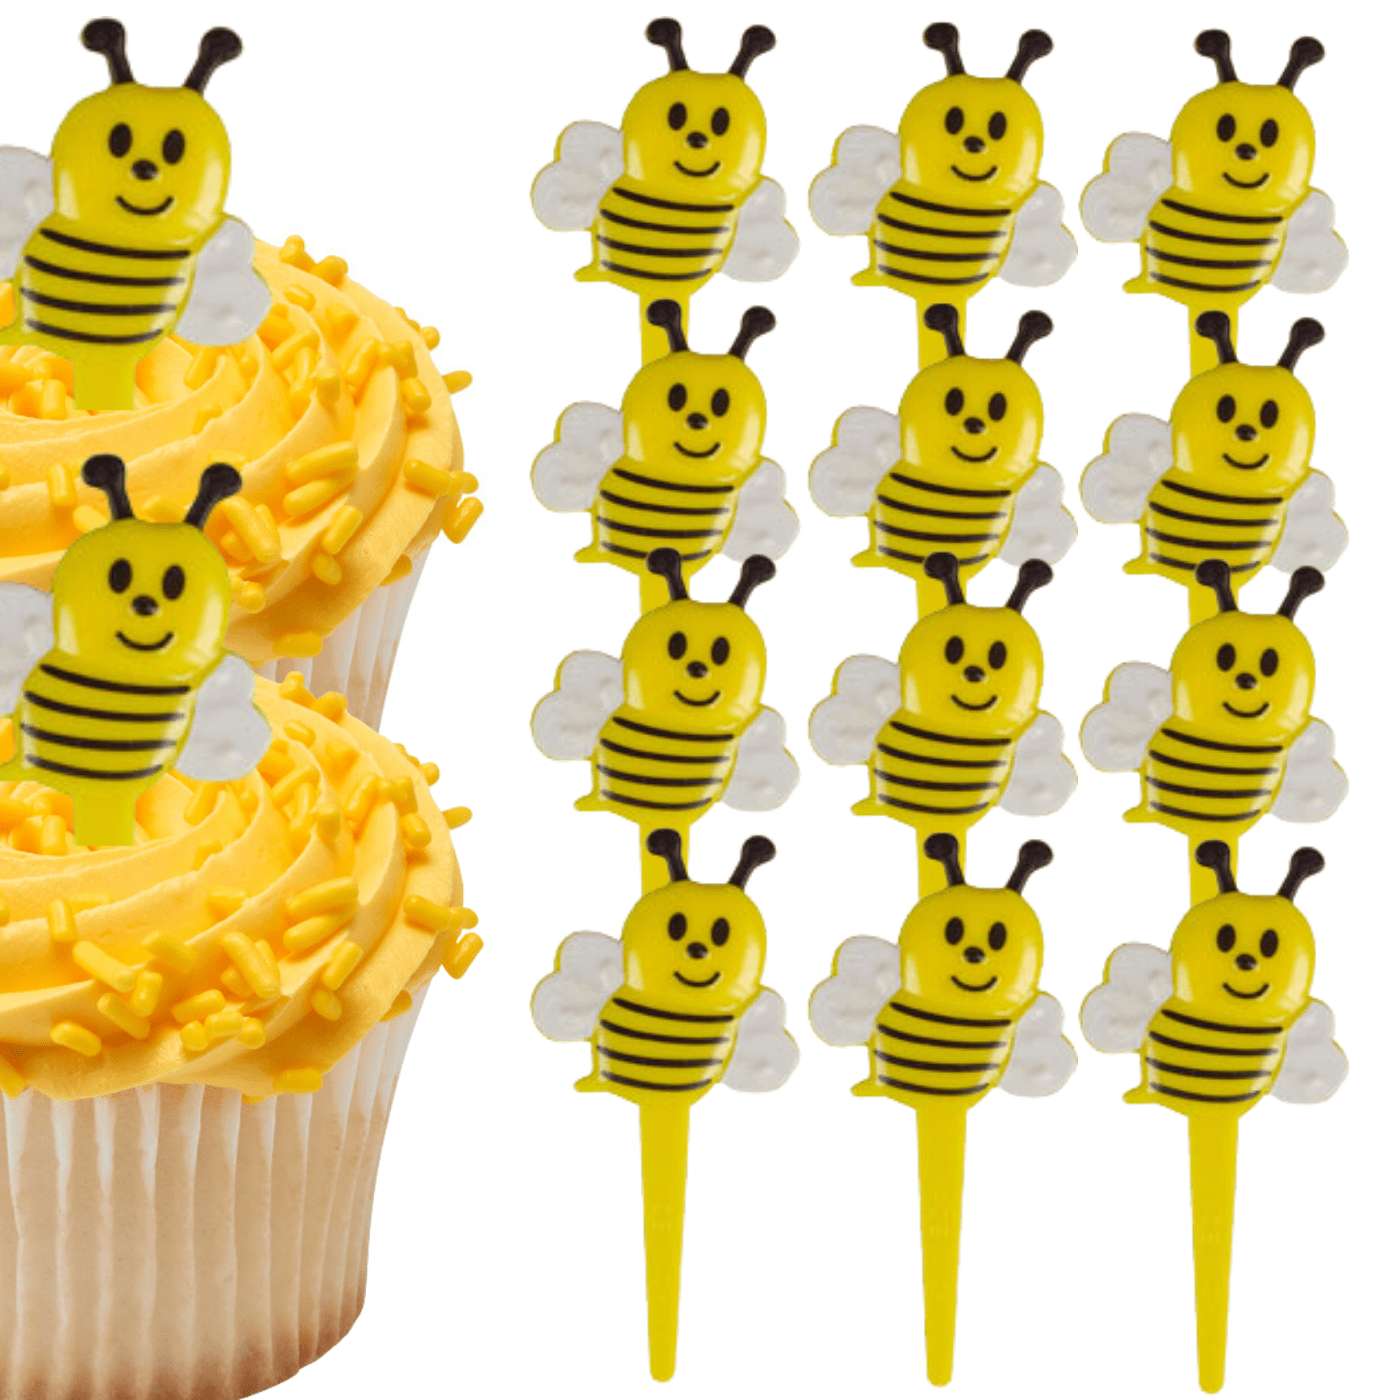 OUNONA 24 Pcs Paper Cake Toppers Shiny Bee Cupcake Toppers Honeybee Fruit  Picks Dessert Decorative Supplies for Kid Birthday Party 